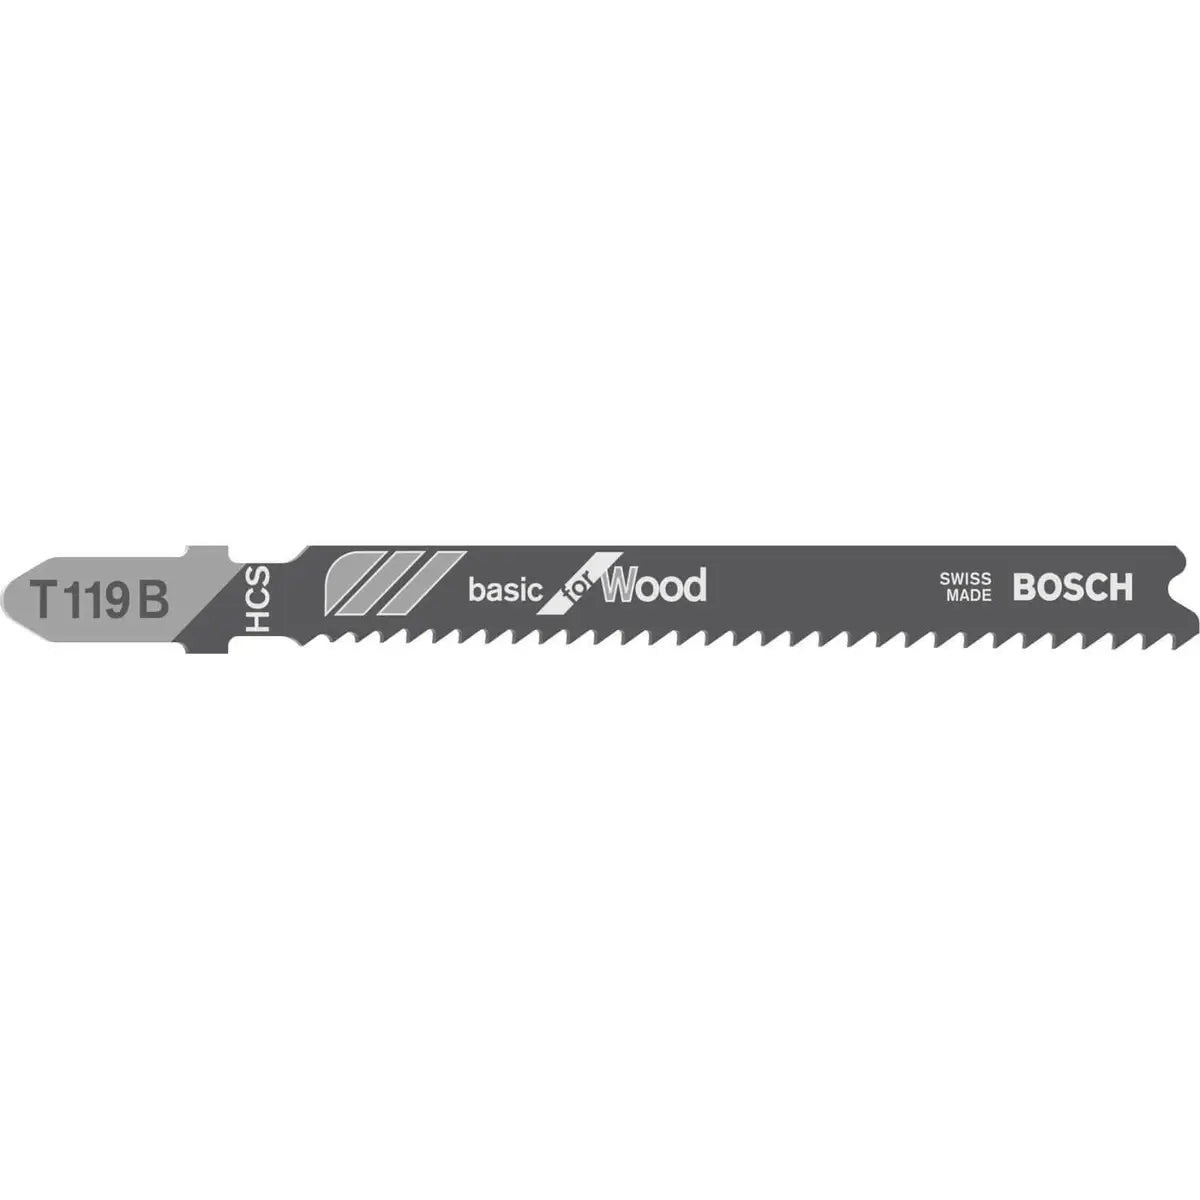 Bosch Jigsaw Blades HCS T 119 B Basic for Wood, 3 Pack 2608630878 Power Tool Services